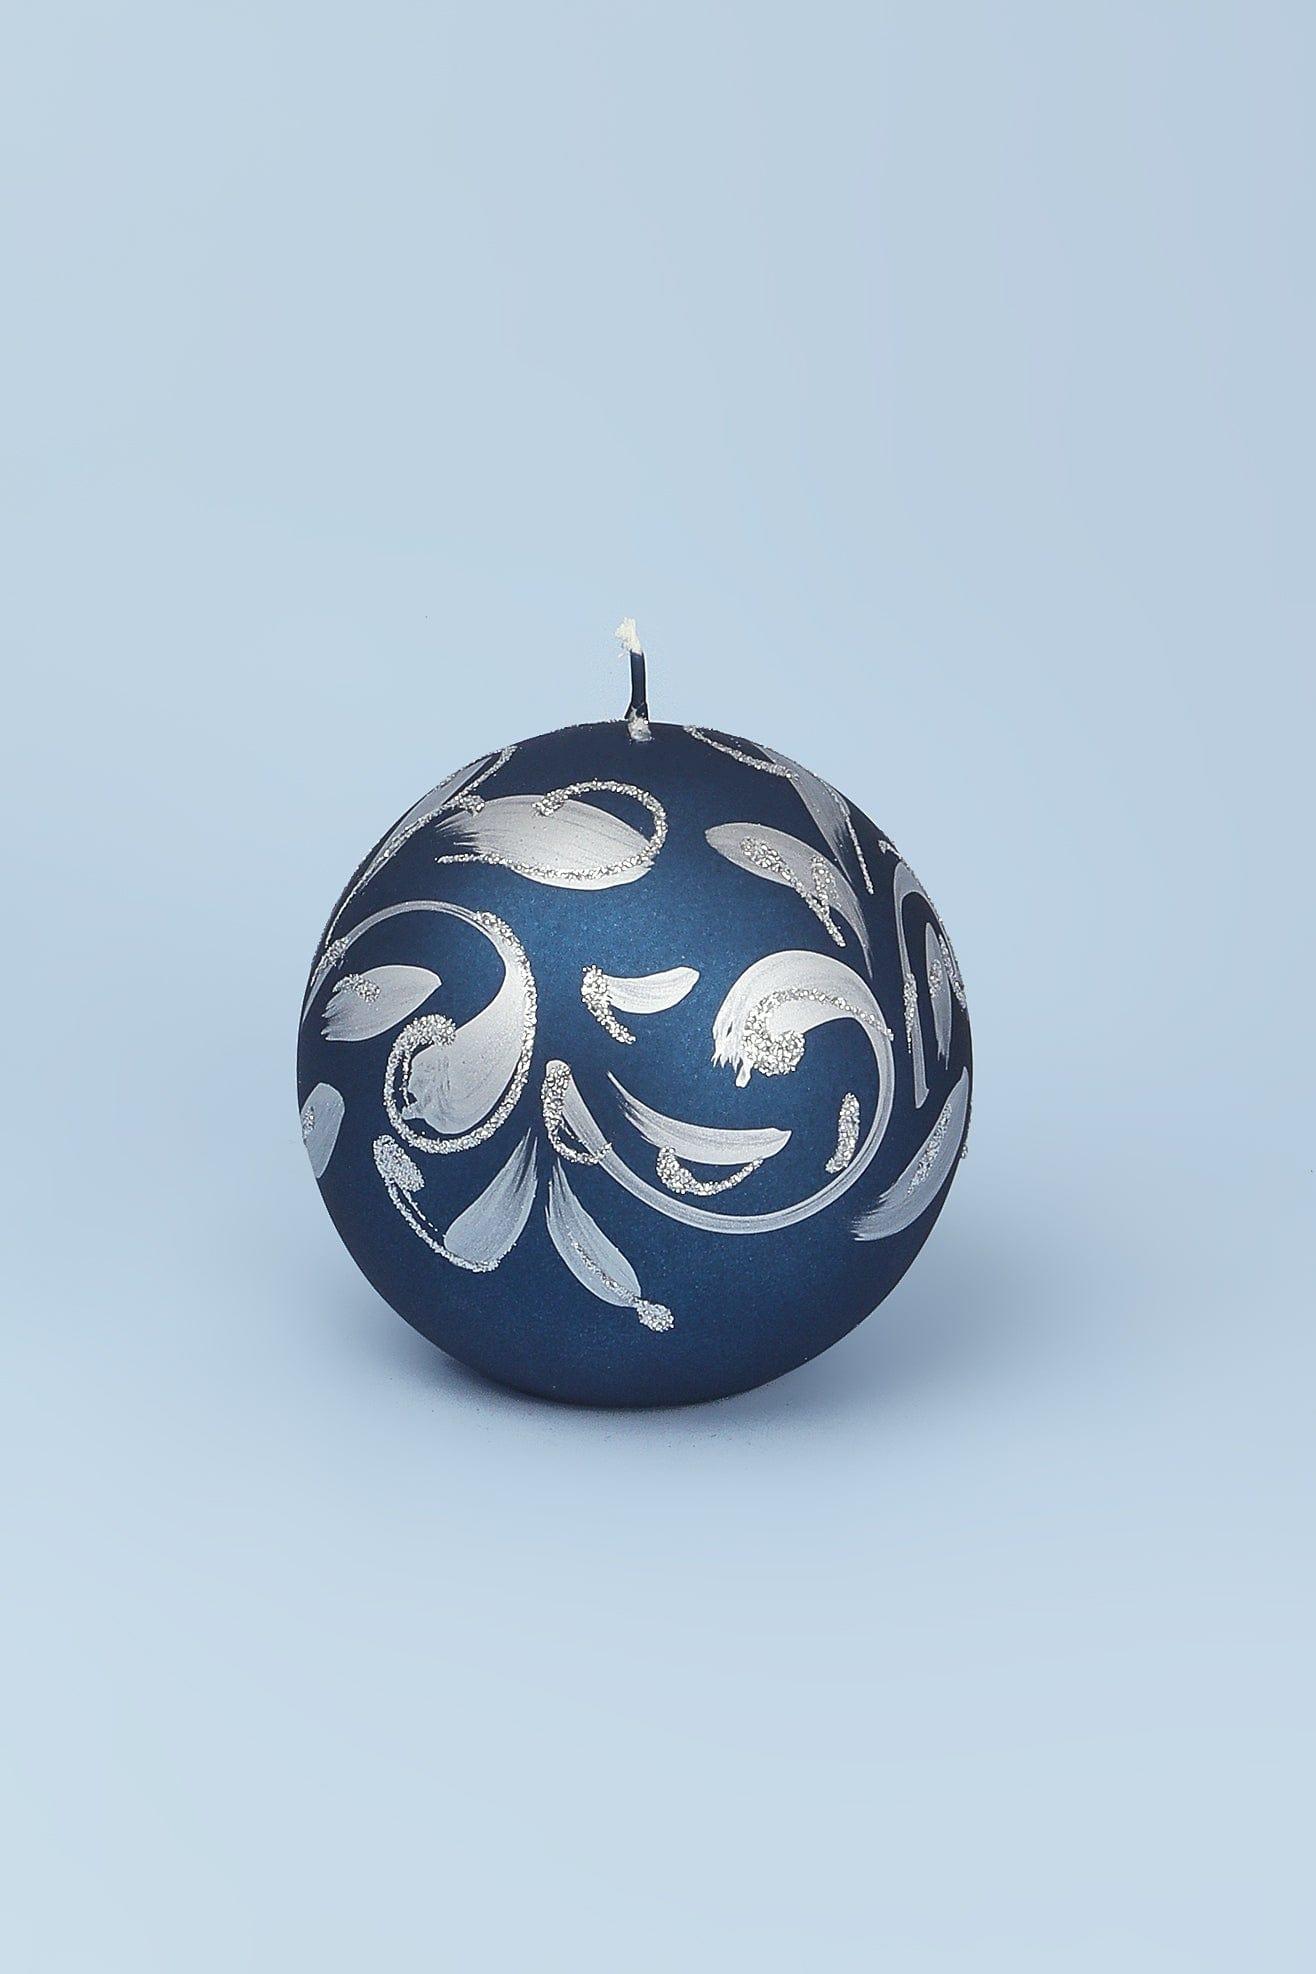 G Decor Candles & Candle Holders Blue Coloured Florentino with Gold or Silver Glitter Festive Sphere Ball Candles